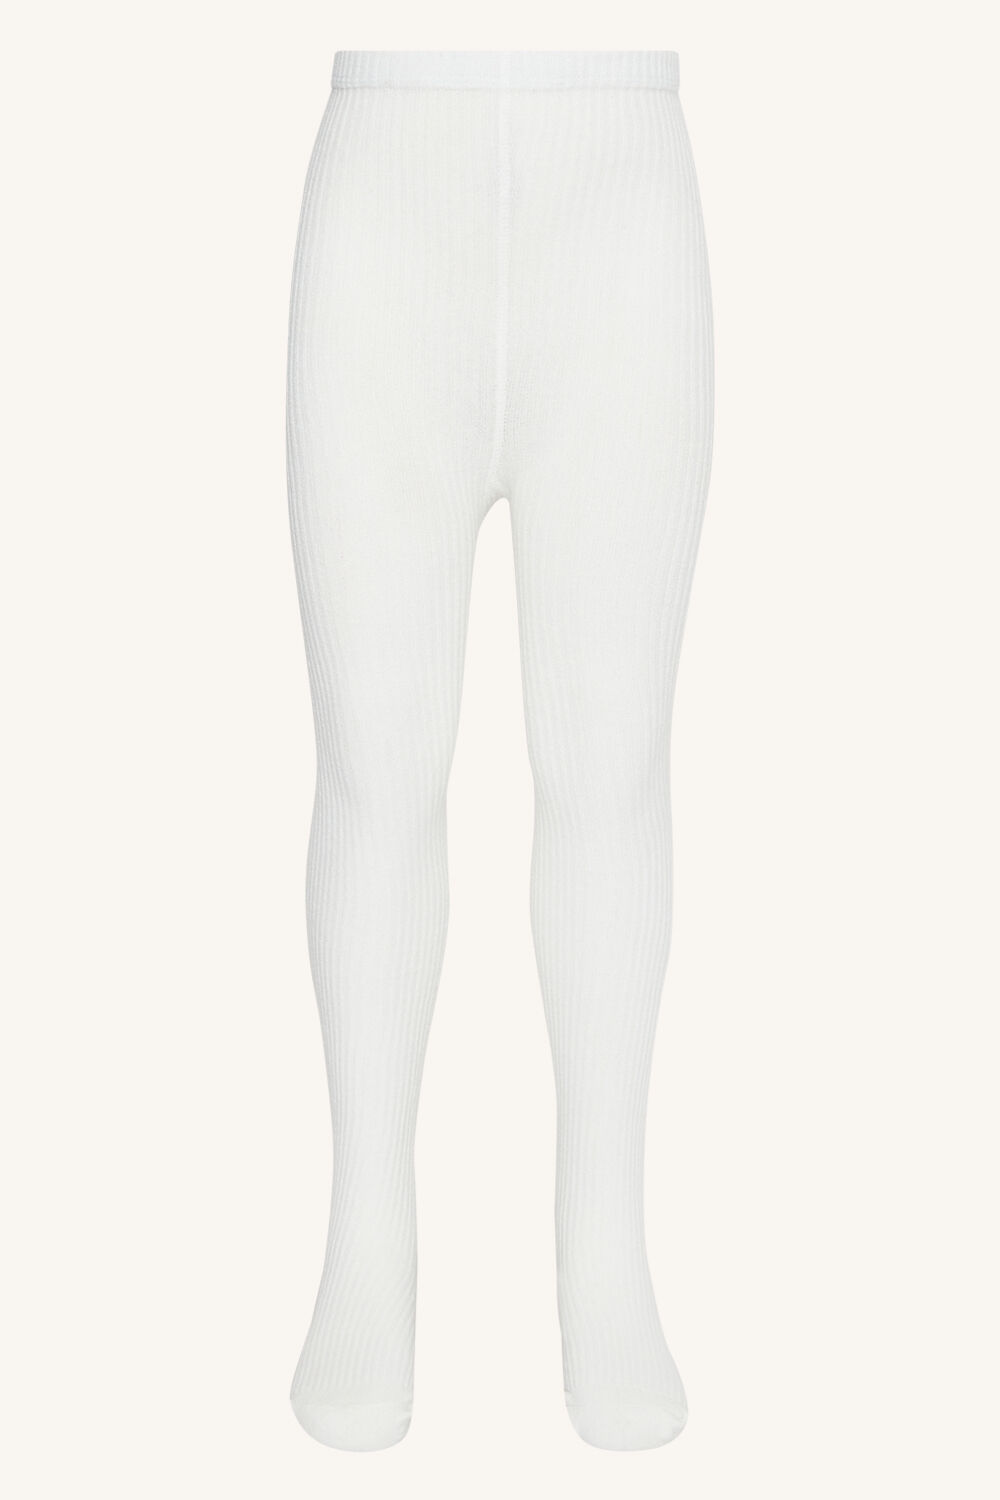 GIRLS RIBBED TIGHTS  in colour CLOUD DANCER